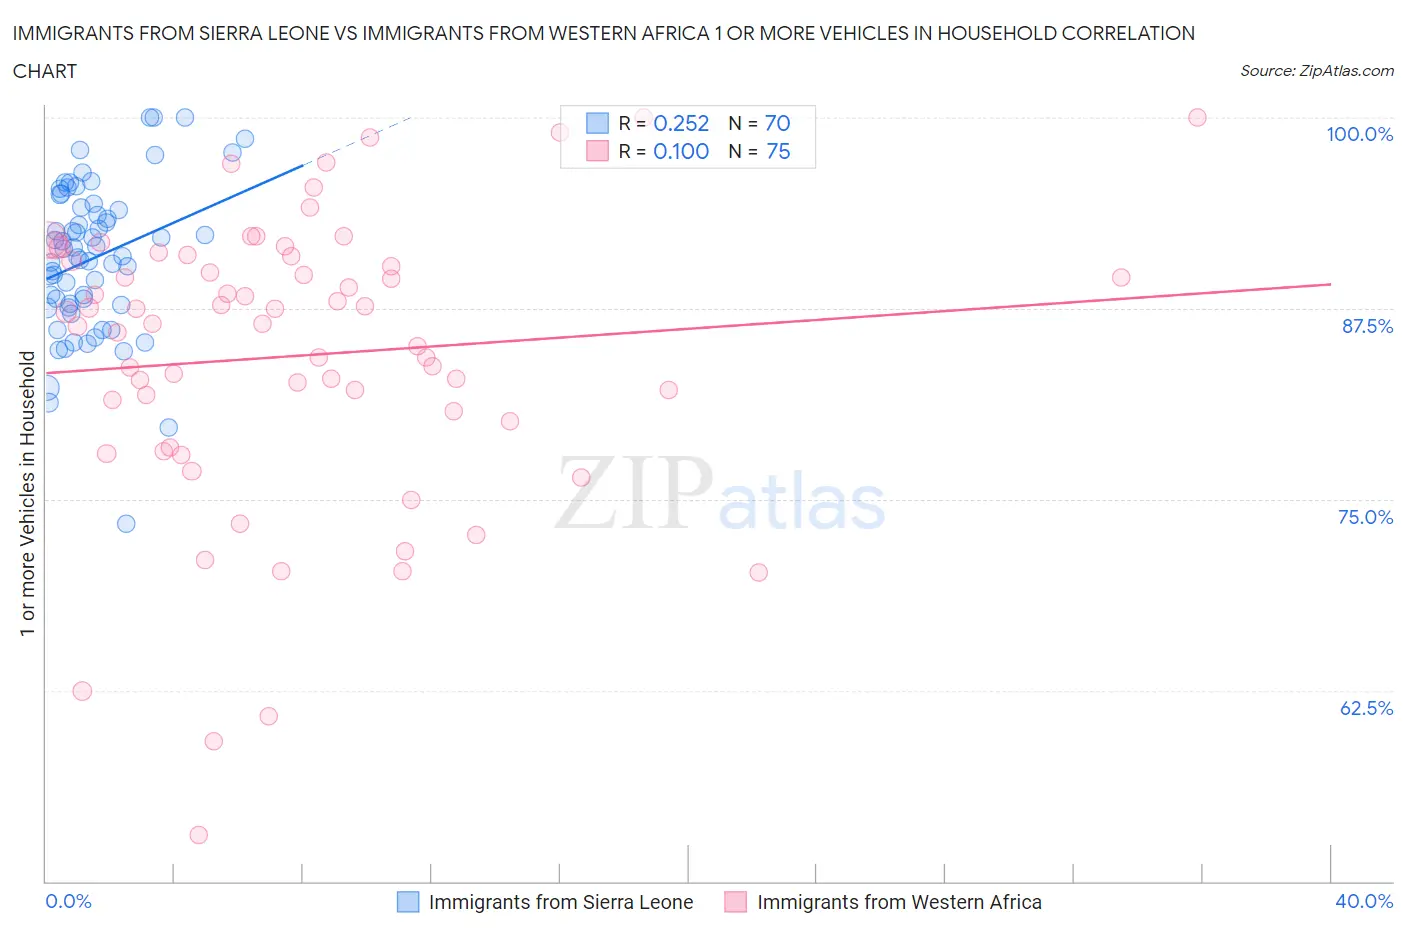 Immigrants from Sierra Leone vs Immigrants from Western Africa 1 or more Vehicles in Household